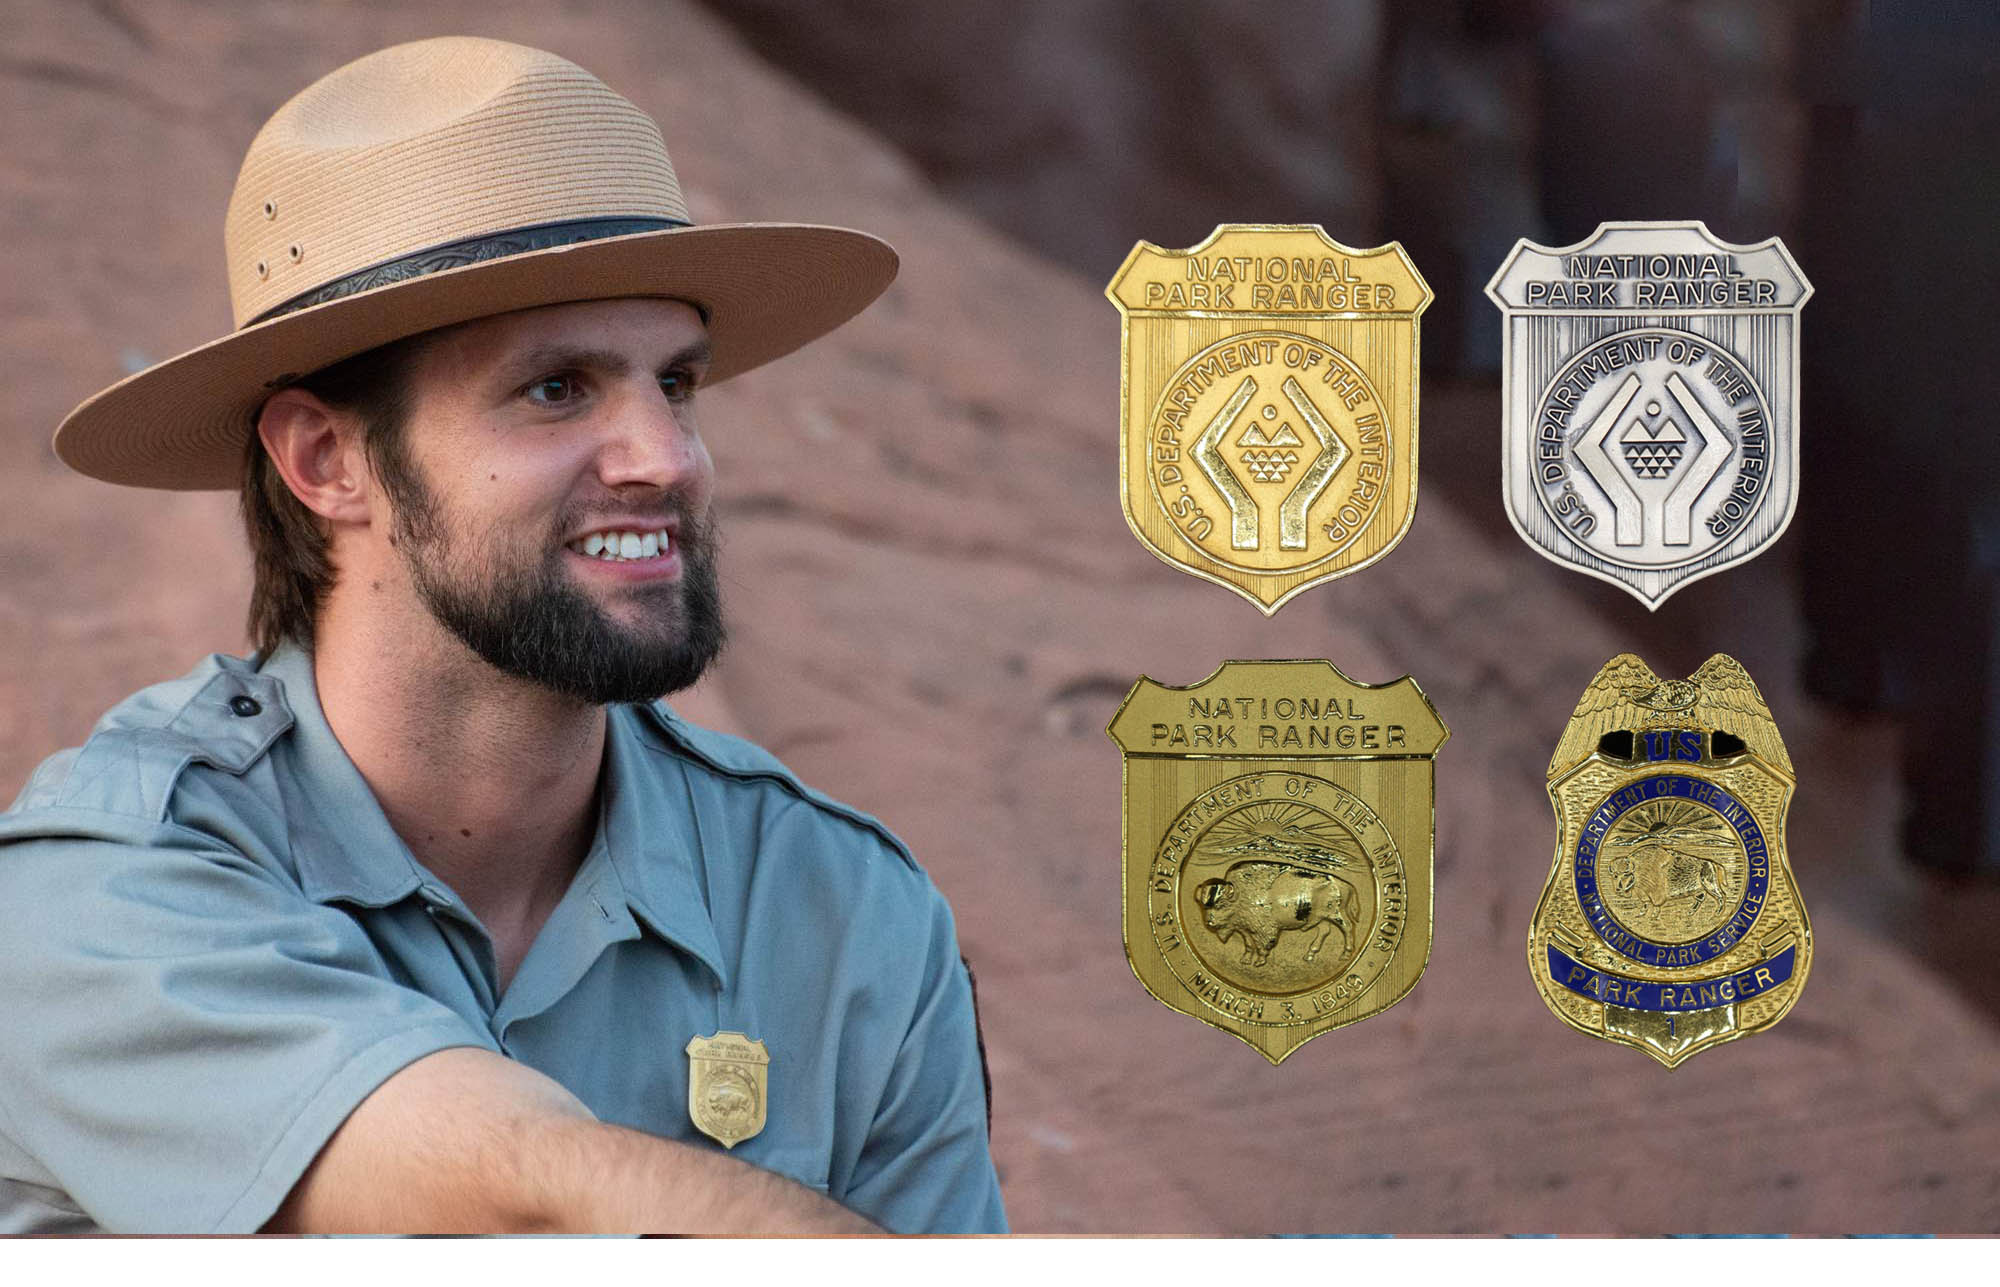 Martin Tow in NPS uniform with shield-shaped badge bearing a bison pinned to his shirt. Four styles of badges superimposed on photo.